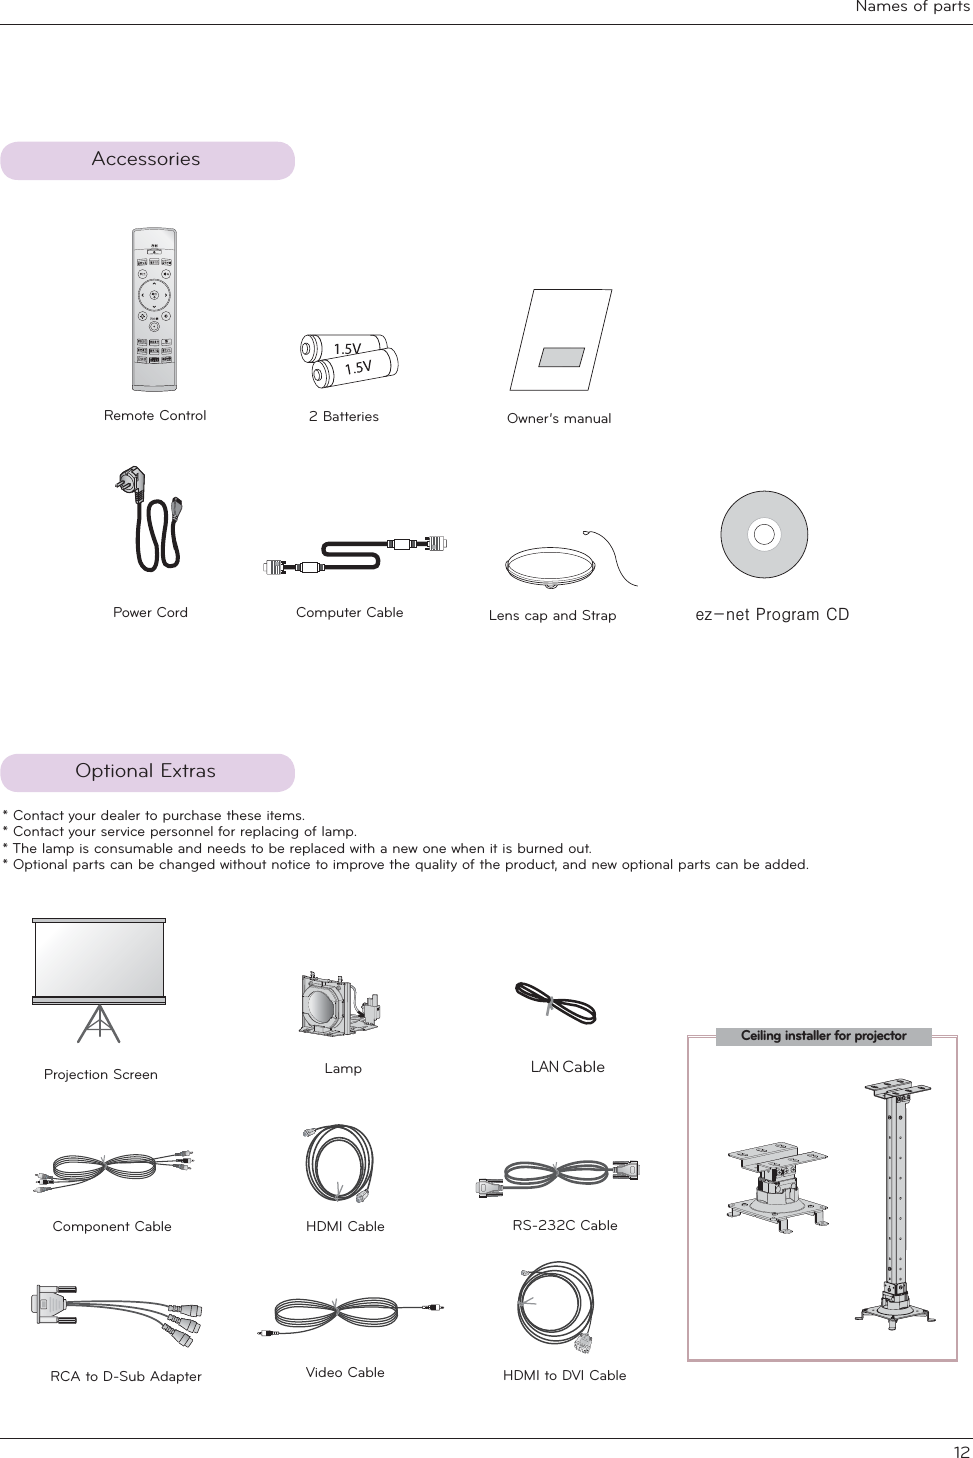 Names of parts12AccessoriesOptional Extras * Contact your dealer to purchase these items.* Contact your service personnel for replacing of lamp.* The lamp is consumable and needs to be replaced with a new one when it is burned out.* Optional parts can be changed without notice to improve the quality of the product, and new optional parts can be added.Remote ControlPower Cord Video Cable HDMI to DVI CableOwner’s manualComputer CableLamp Projection Screen 2 BatteriesComponent CableLens cap and StrapRS-232C CableRCA to D-Sub AdapterHDMI Cableh}0qhw#Surjudp#FGLAN CableCeiling installer for projector